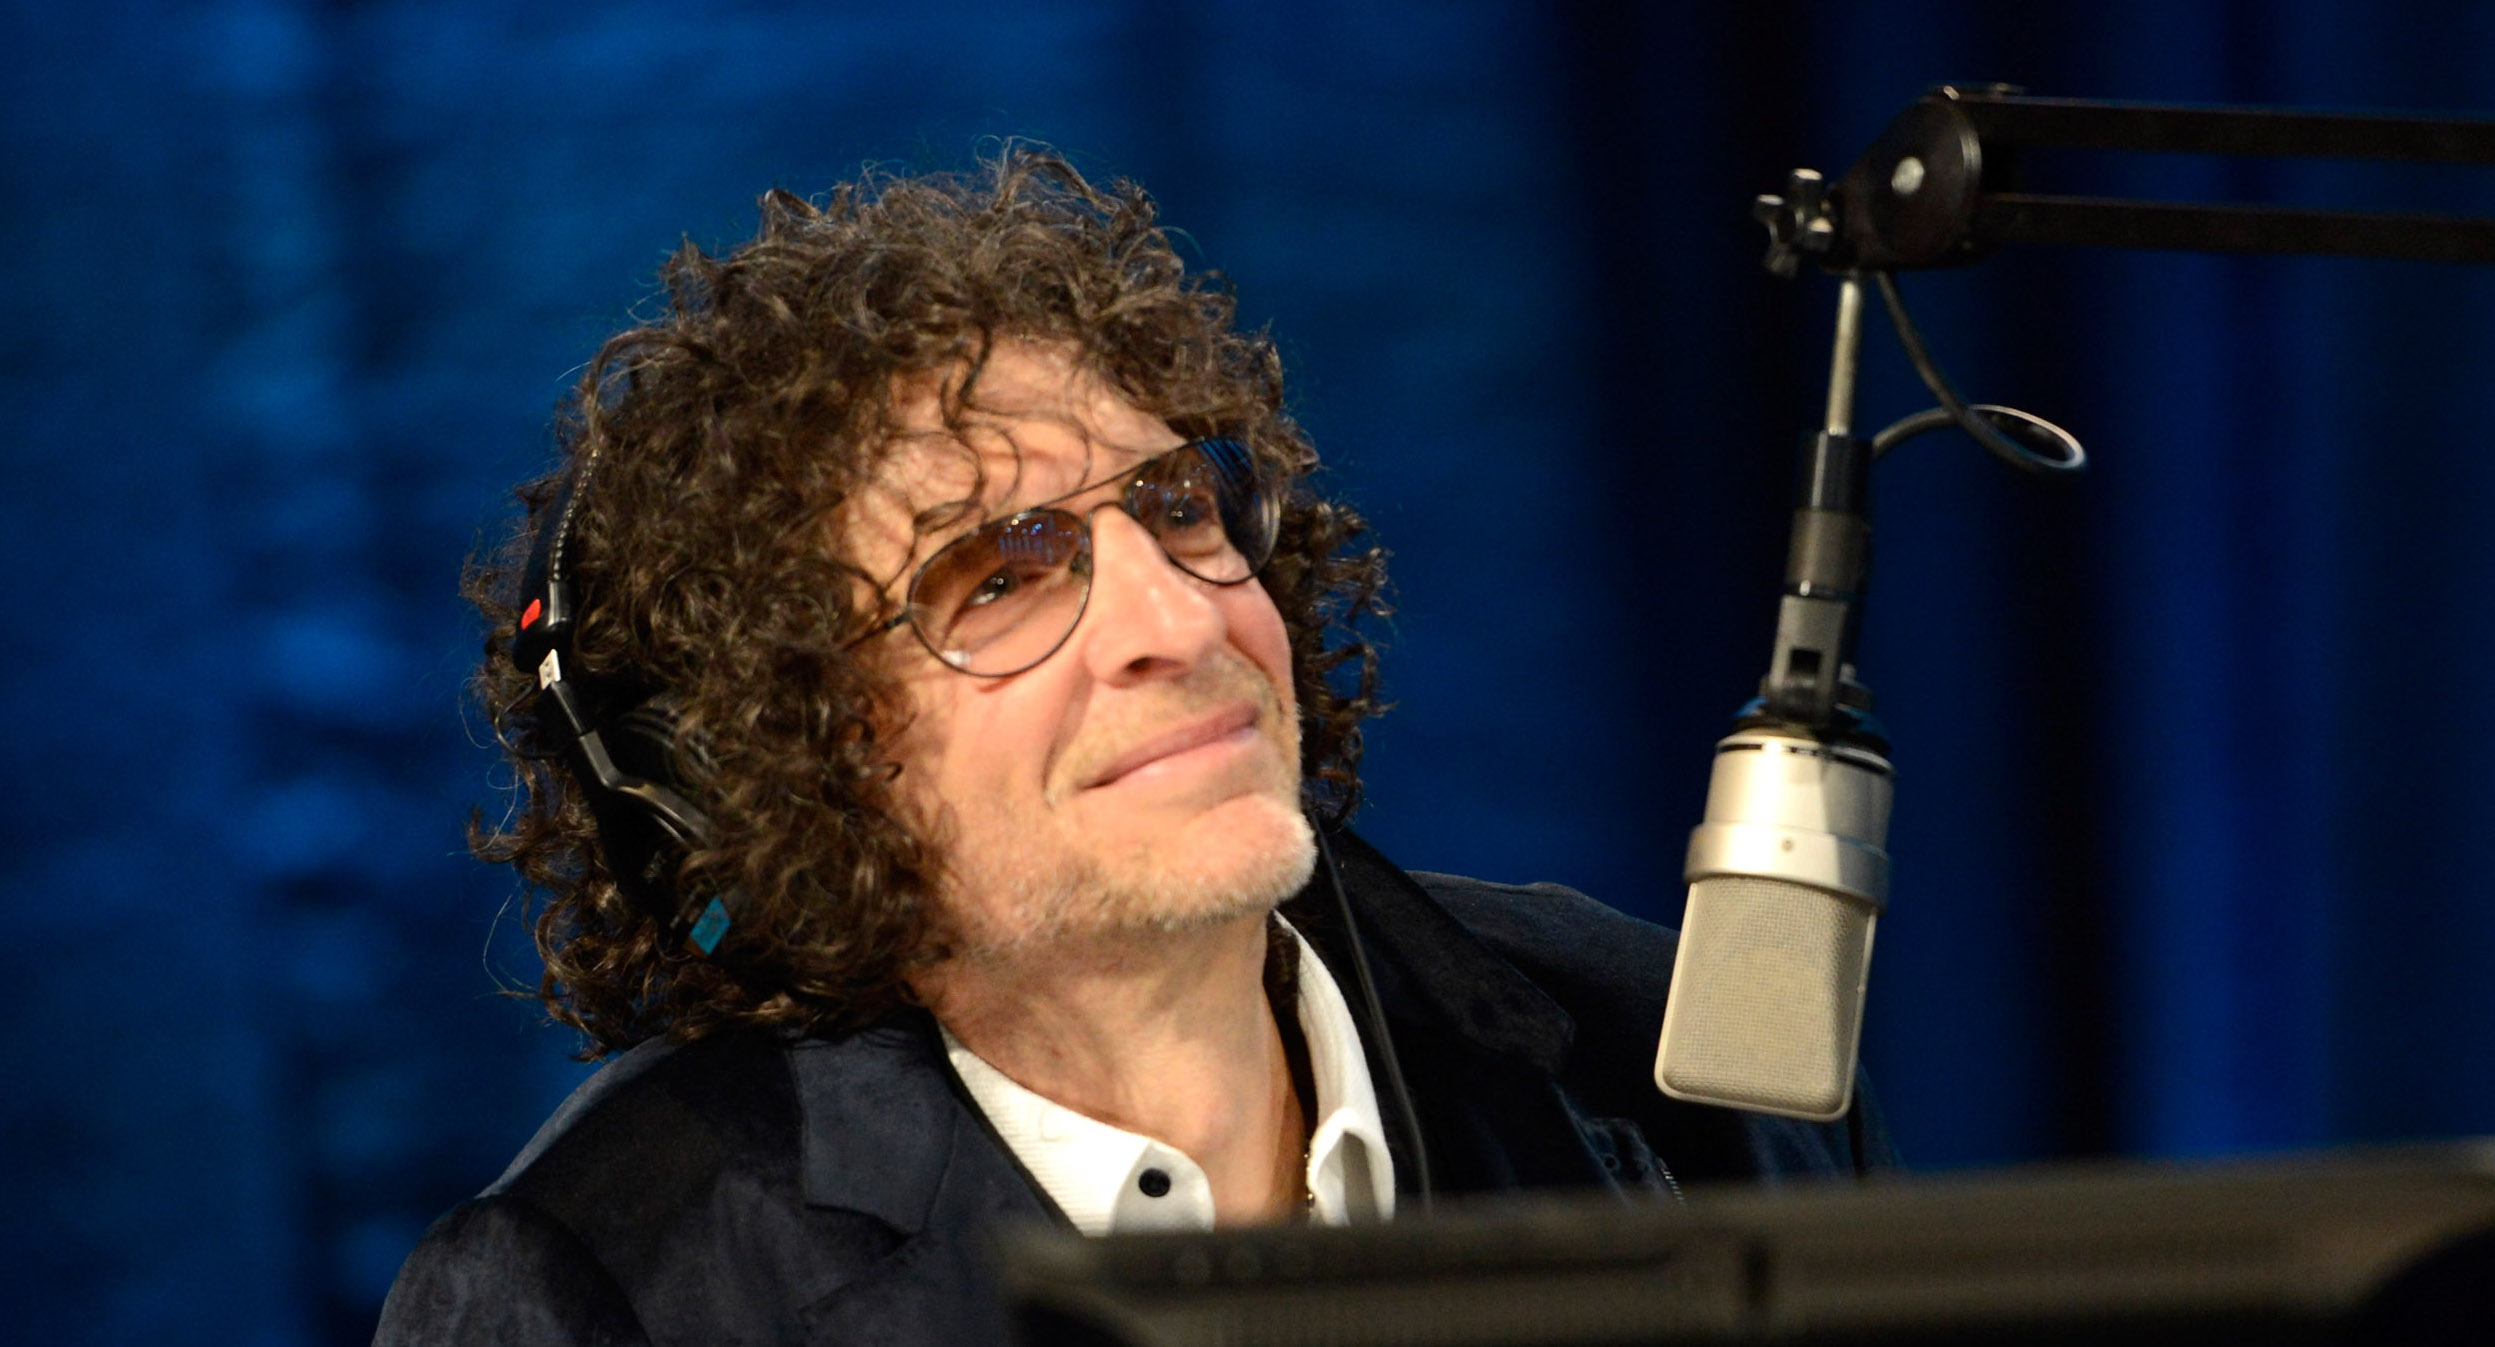 Howard Stern Calls Depp A Huge Narcissist Over Heard Trial Mocks Actors Difficulty In Speaking The English Language